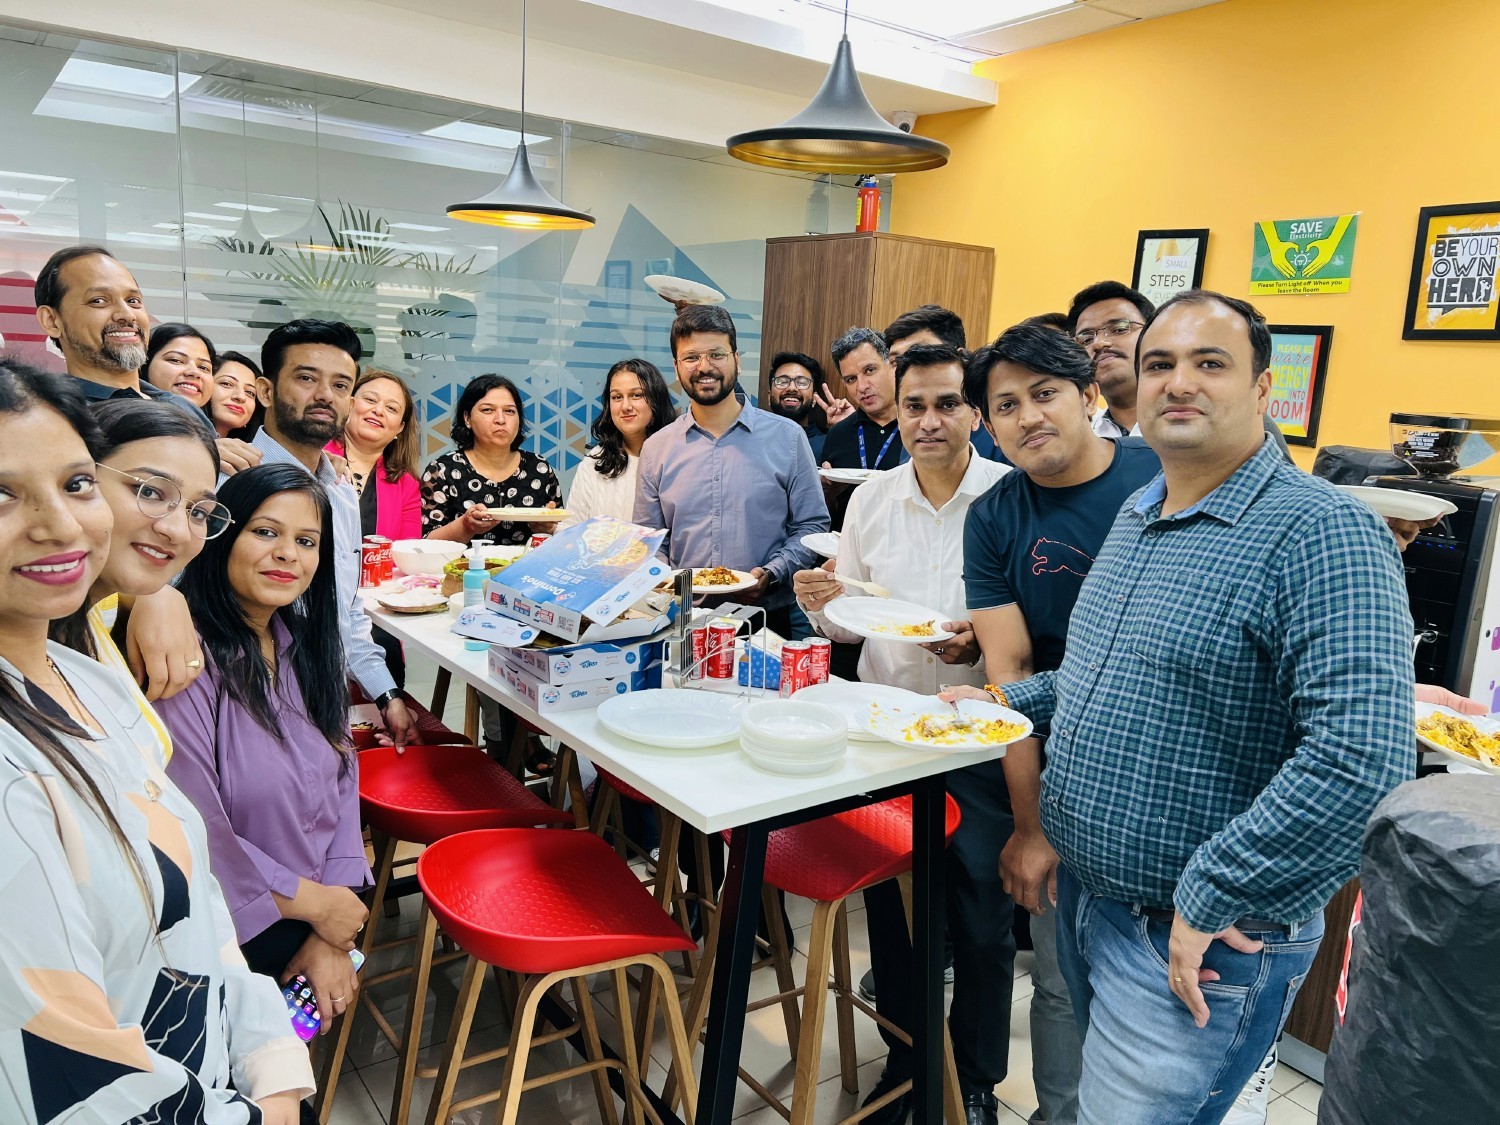 A team lunch at our Noida office!